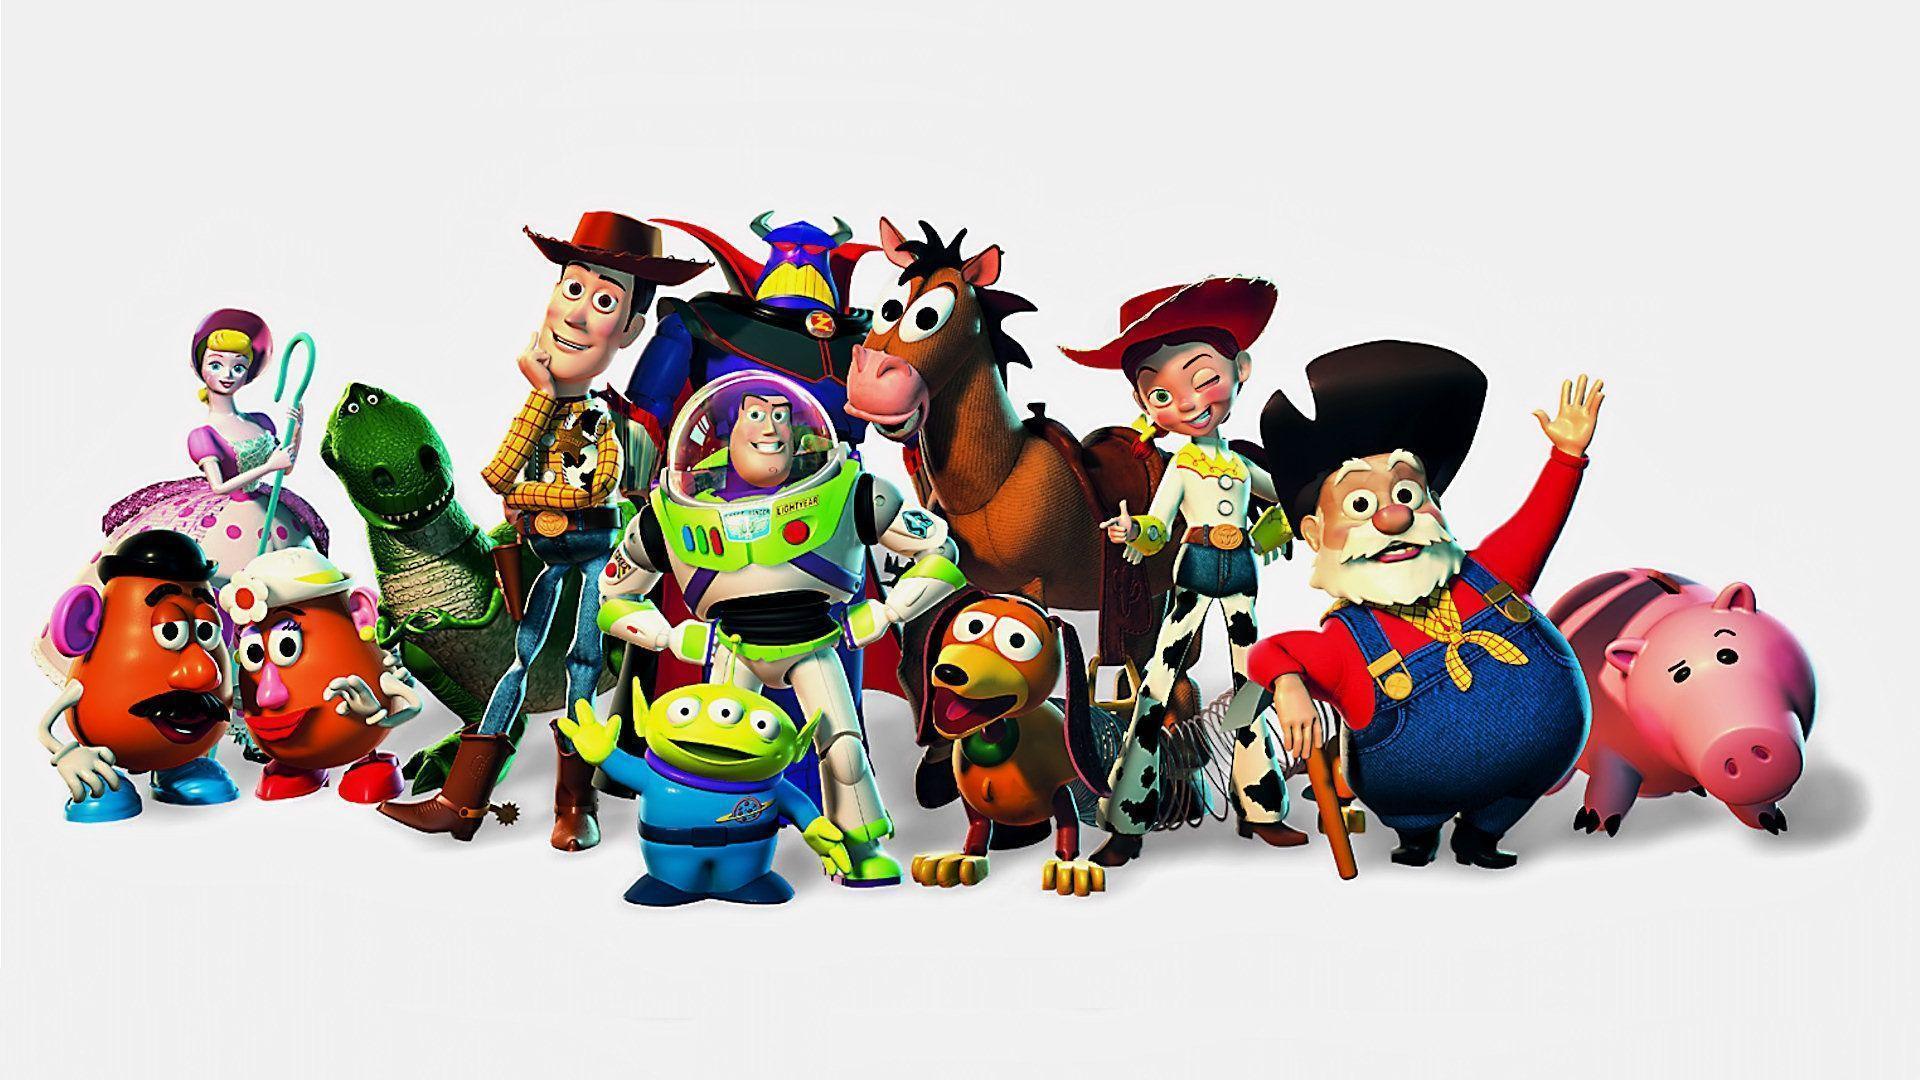 Toy story 1 2 3 wallpaper HD 1920x1080 background